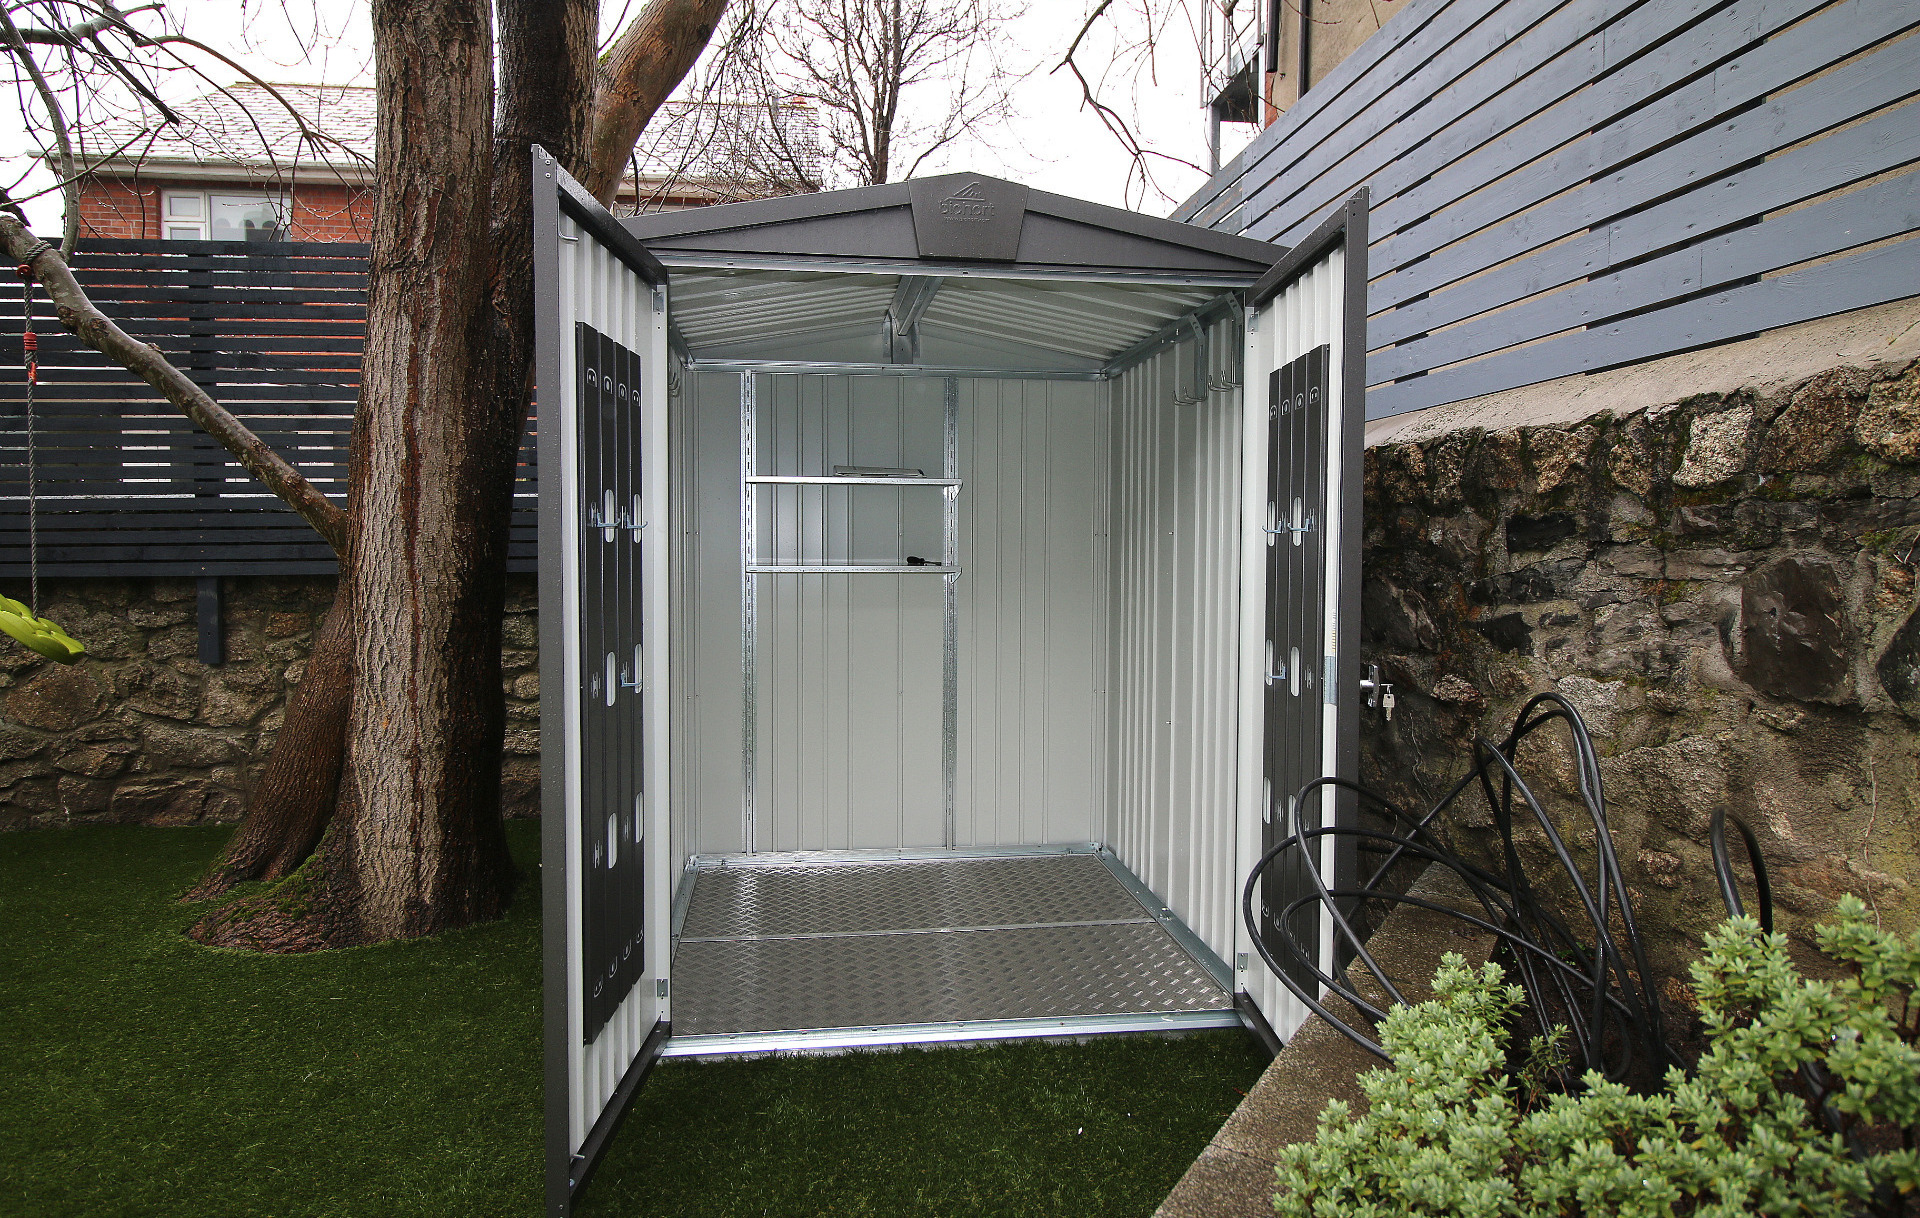 Biohort Europa Garden Shed Size 2 | Dublin's BEST Prices (+ FREE installation) - CALL NOW to order  | in metallic dark grey - supplied + fitted in Dublin 6 by Owen Chubb Landscapers